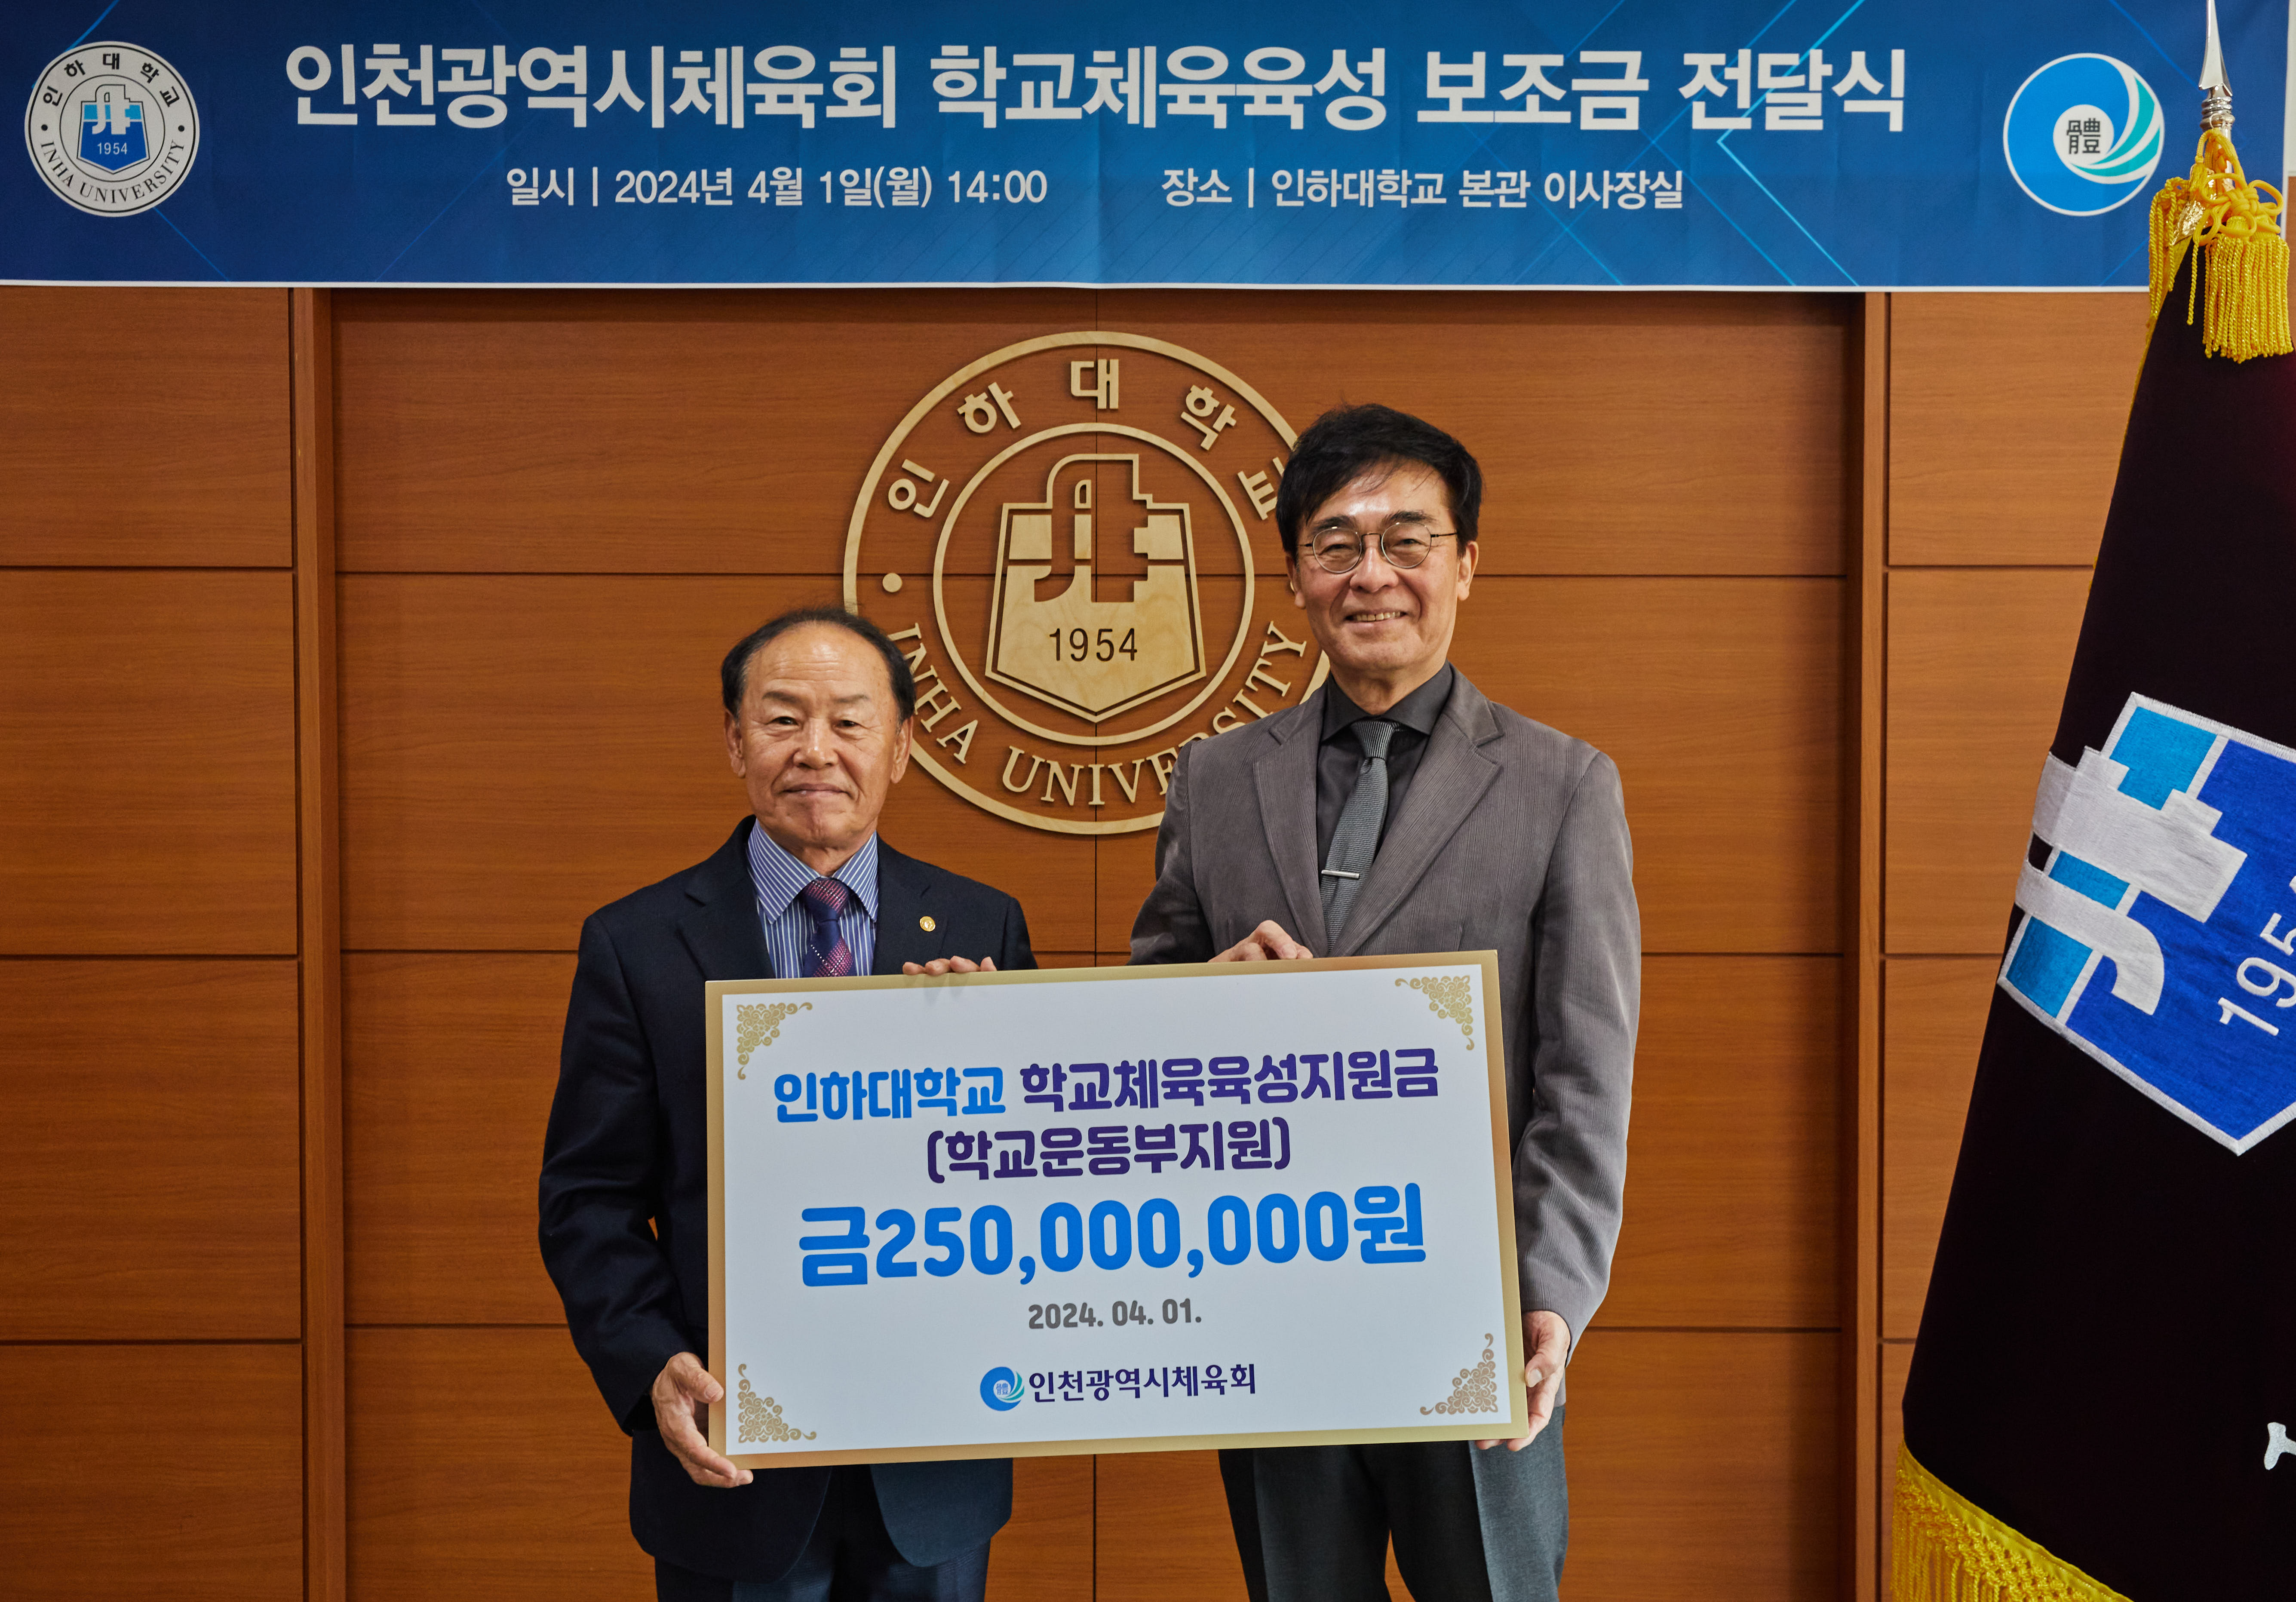 ‘University sports development subsidy backup from Incheon City Sports Council’ image